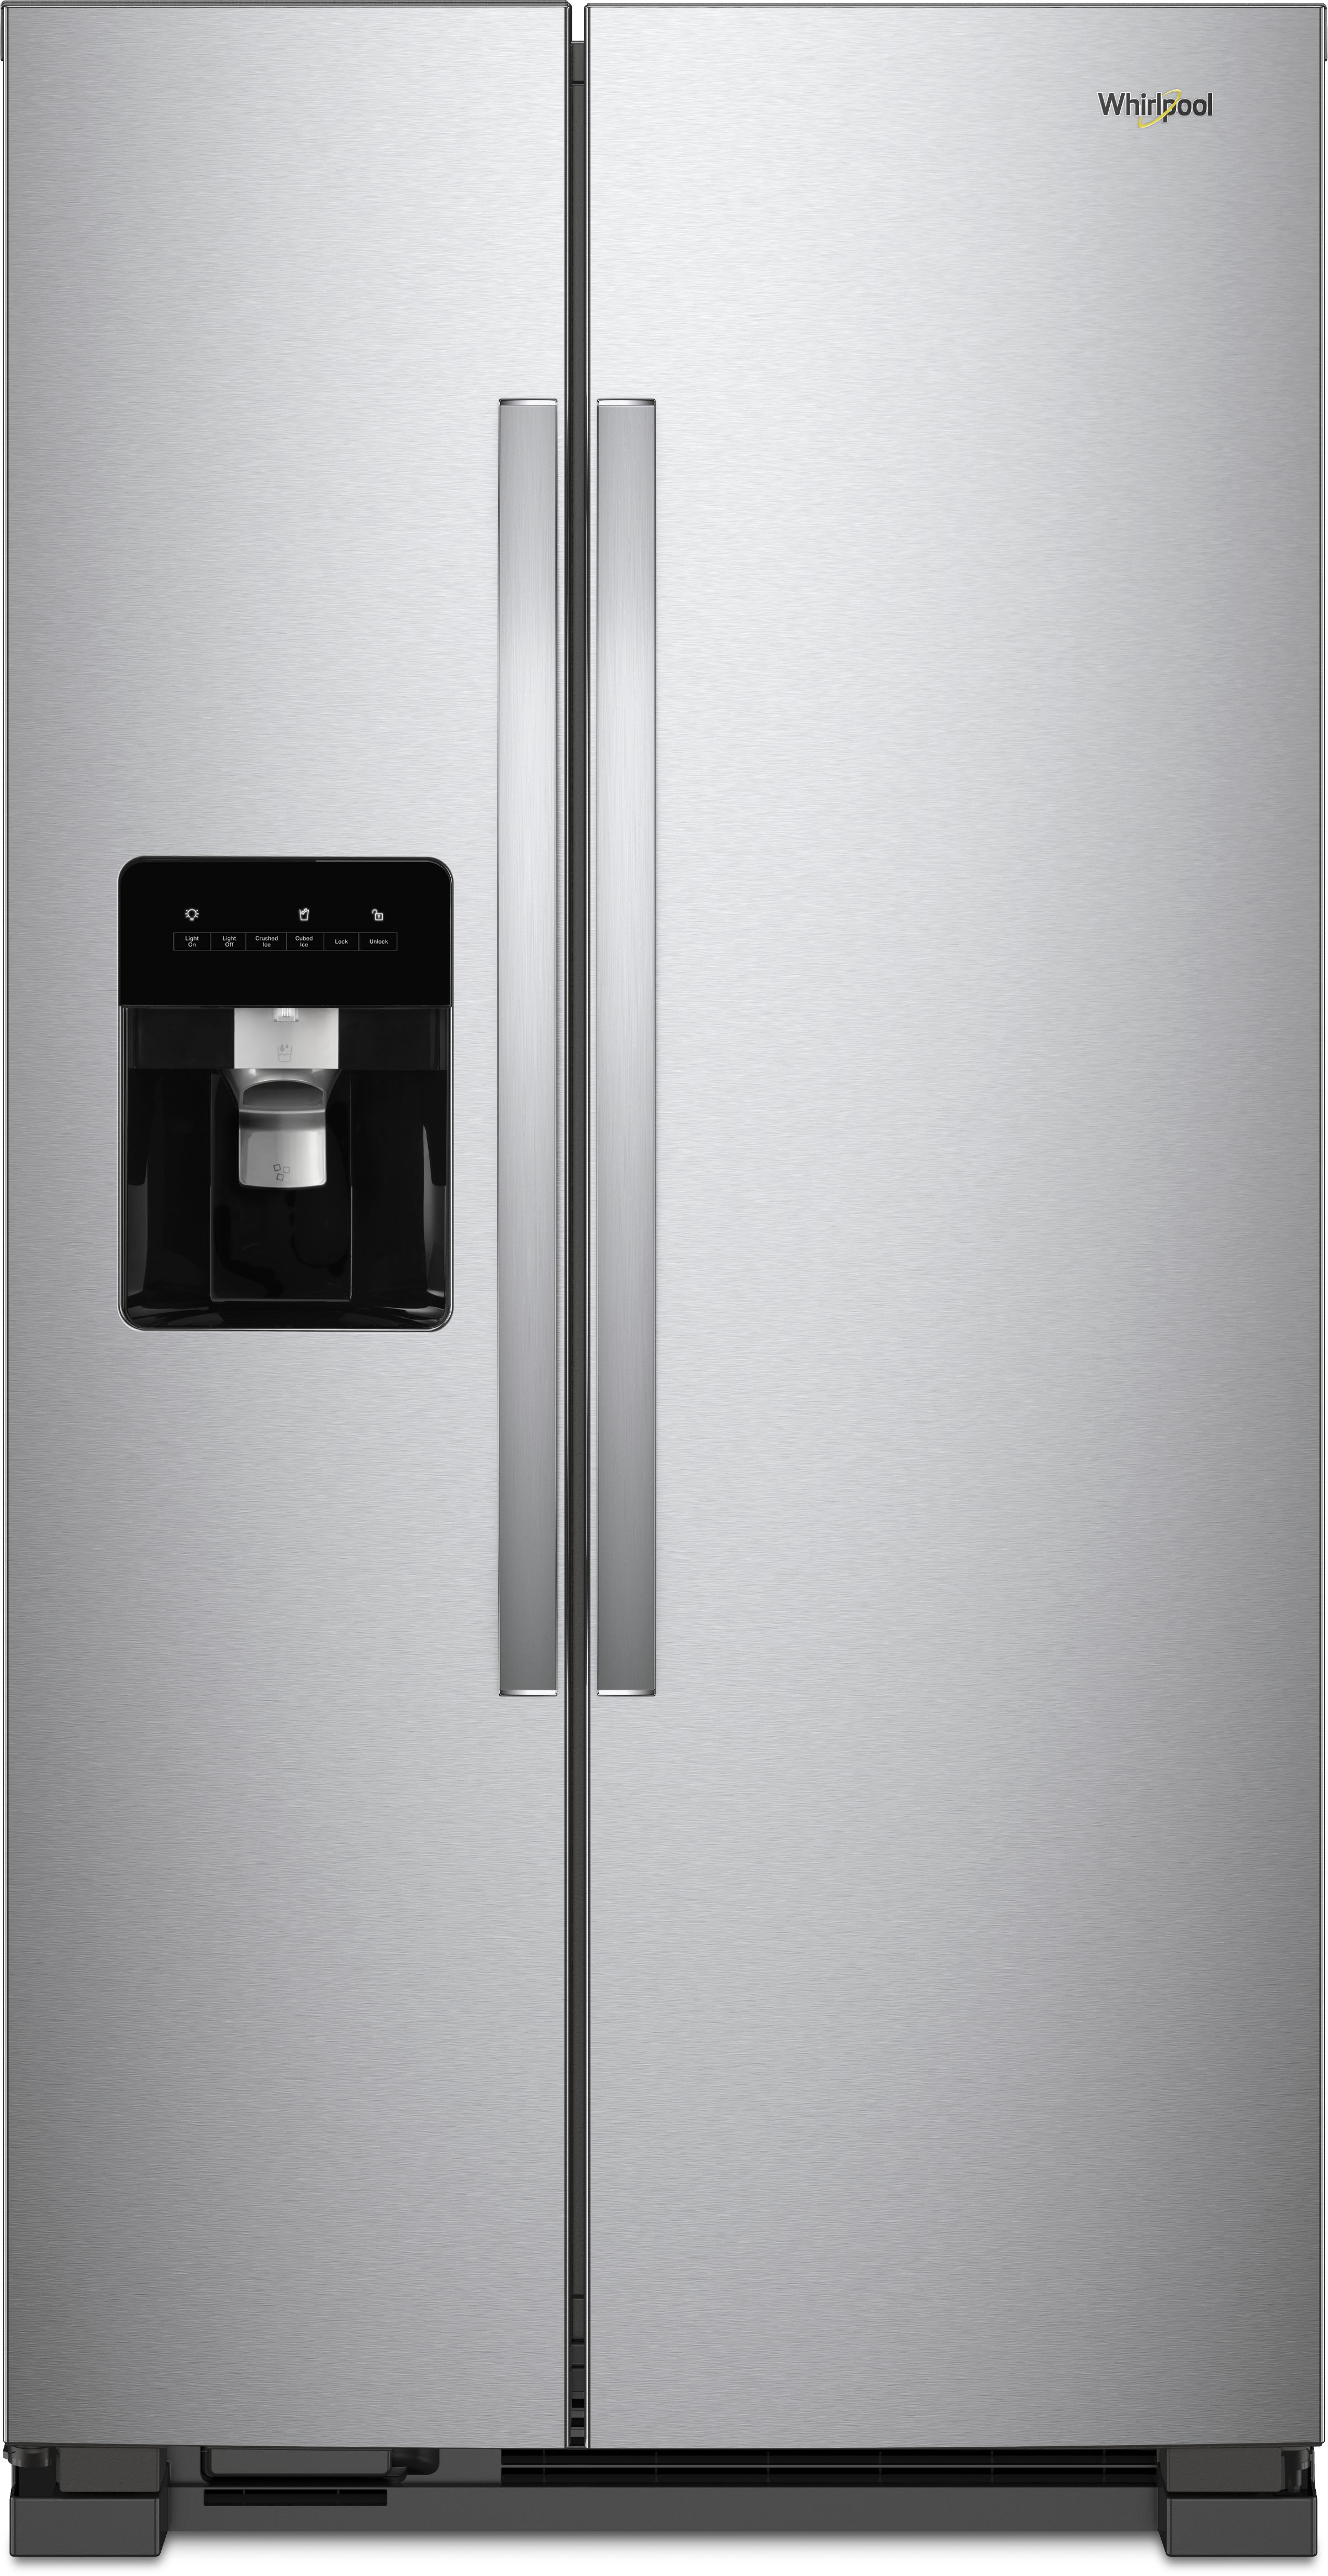 Whirlpool® 21 Cu. Ft. Side-By-Side Refrigerator-Monochromatic Stainless Steel